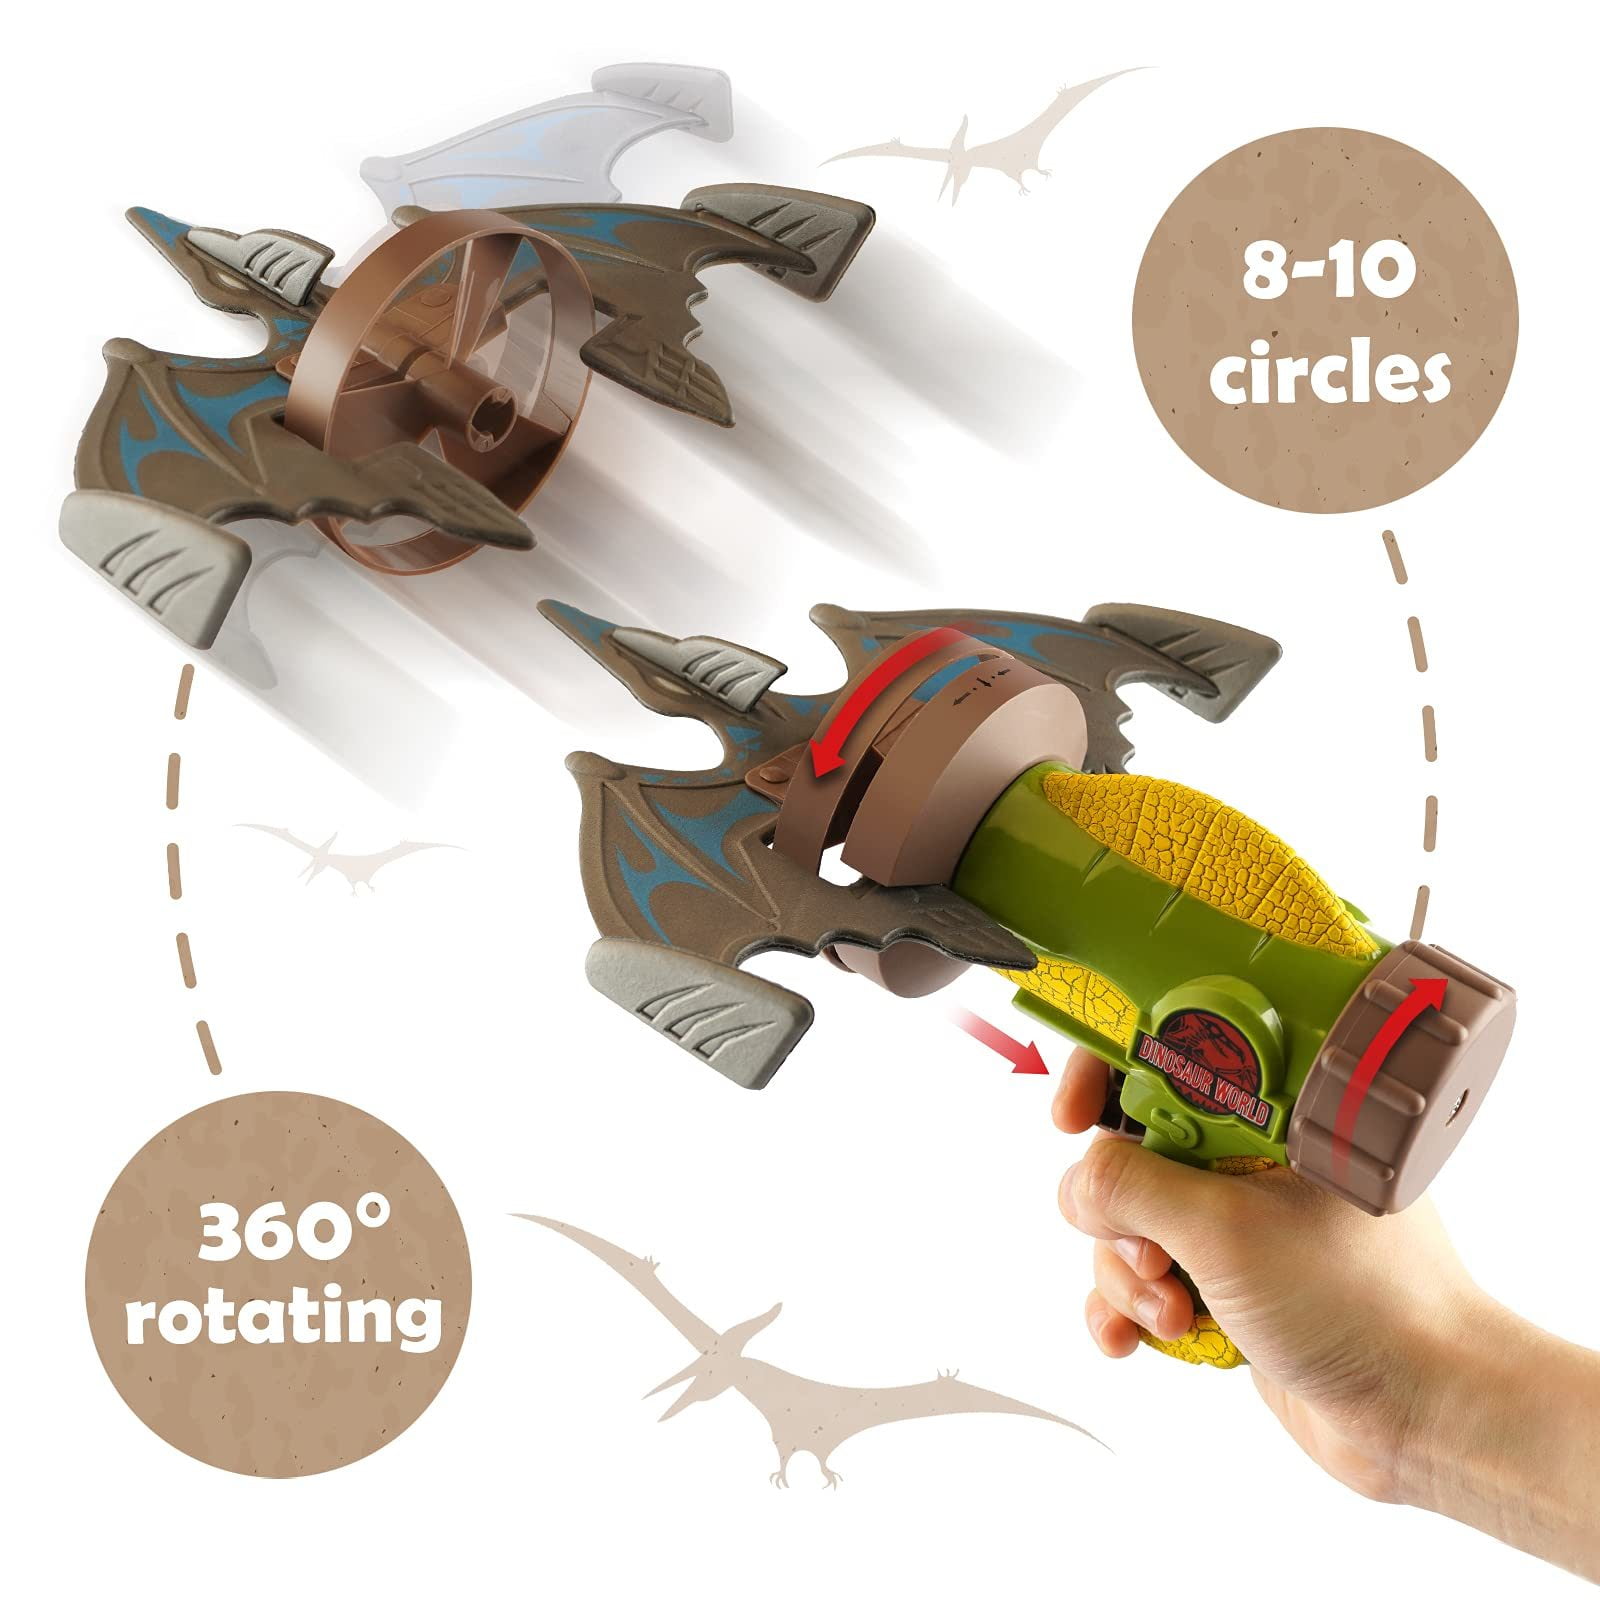 Ratation Rocket Launcher Airplane Toy with 4 Dinosaur Targets 2 Foam Pterosaur Shooting Games for Outdoor Kids Toys 5 6 7 8 Year Old Boy Catapult Plane Toy Christmas Easter Gift